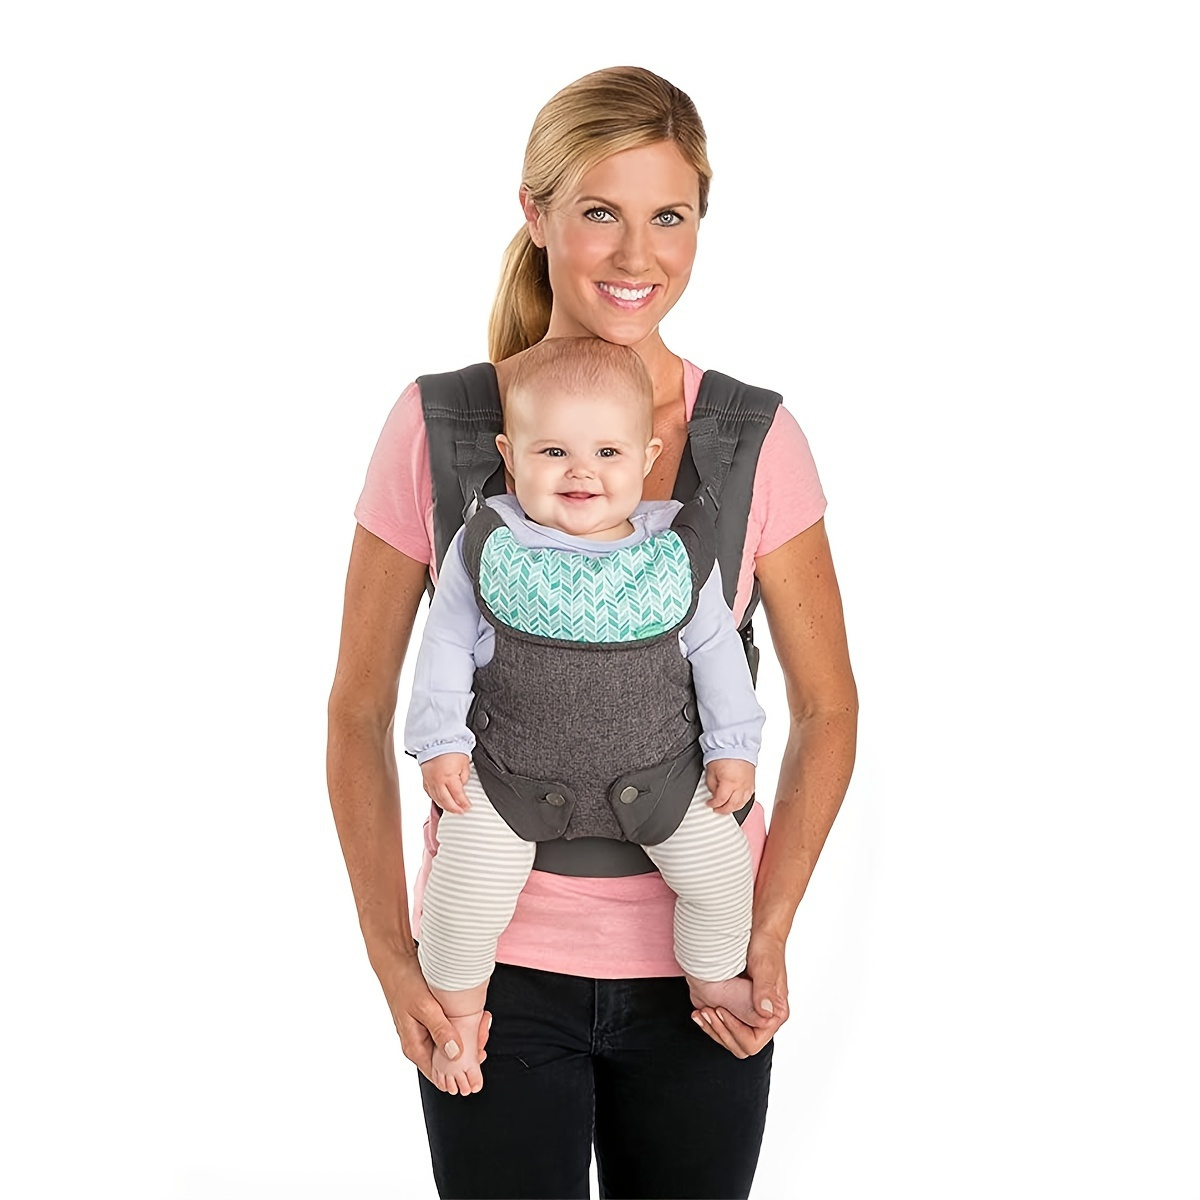 

Light Grey 4-in-1 Convertible Carrier - Ergonomic, Front & Back Carry For Newborns & Babies Up To 32 Lbs!